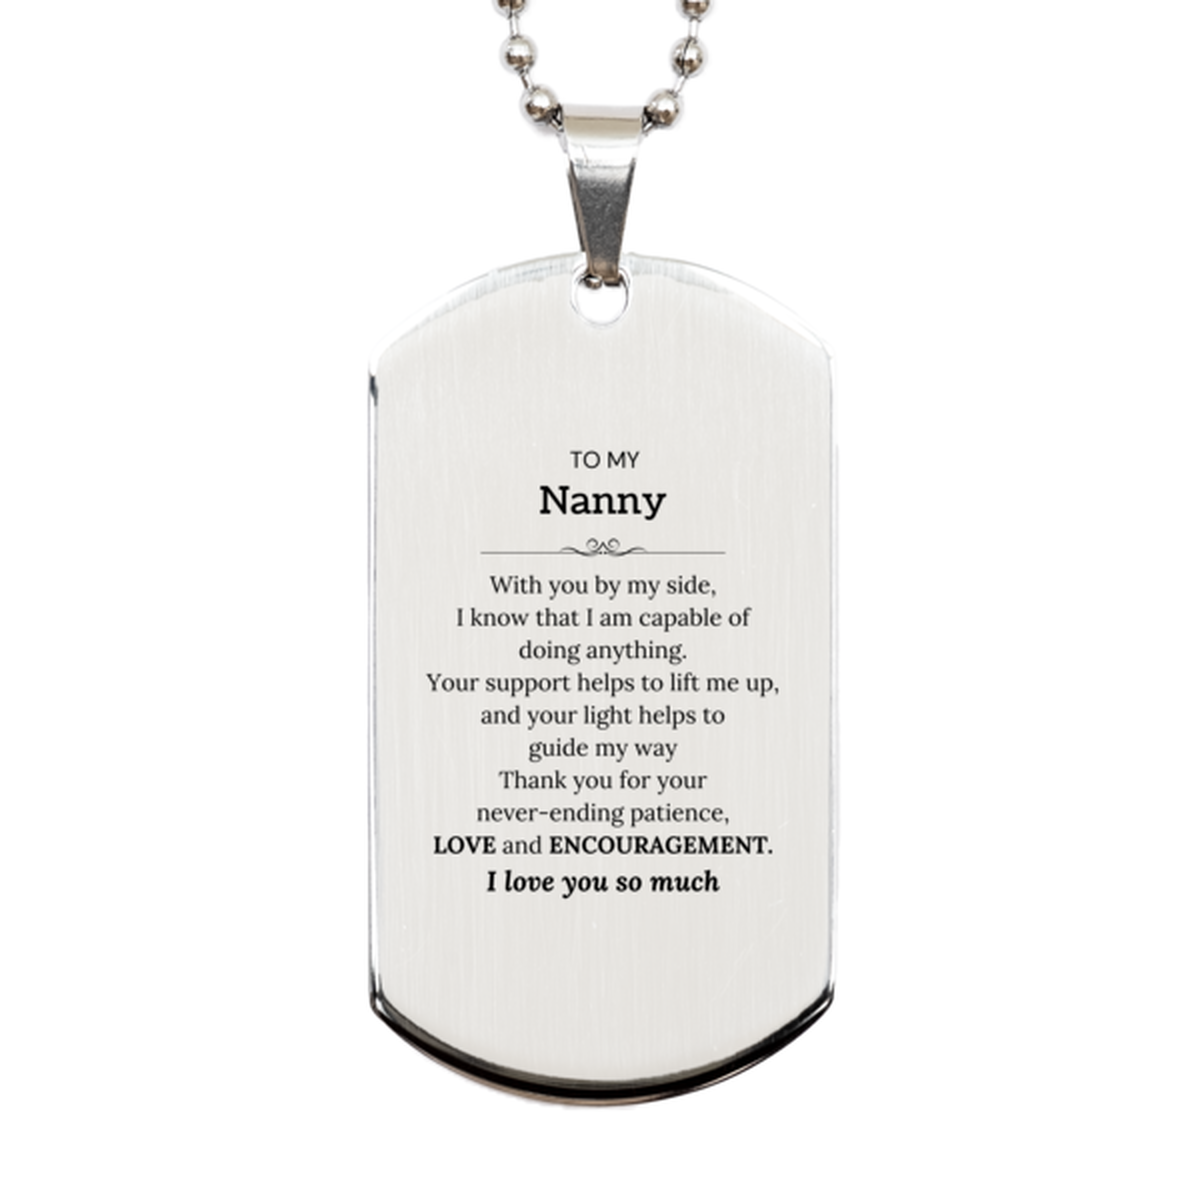 Appreciation Nanny Silver Dog Tag Gifts, To My Nanny Birthday Christmas Wedding Keepsake Gifts for Nanny With you by my side, I know that I am capable of doing anything. I love you so much